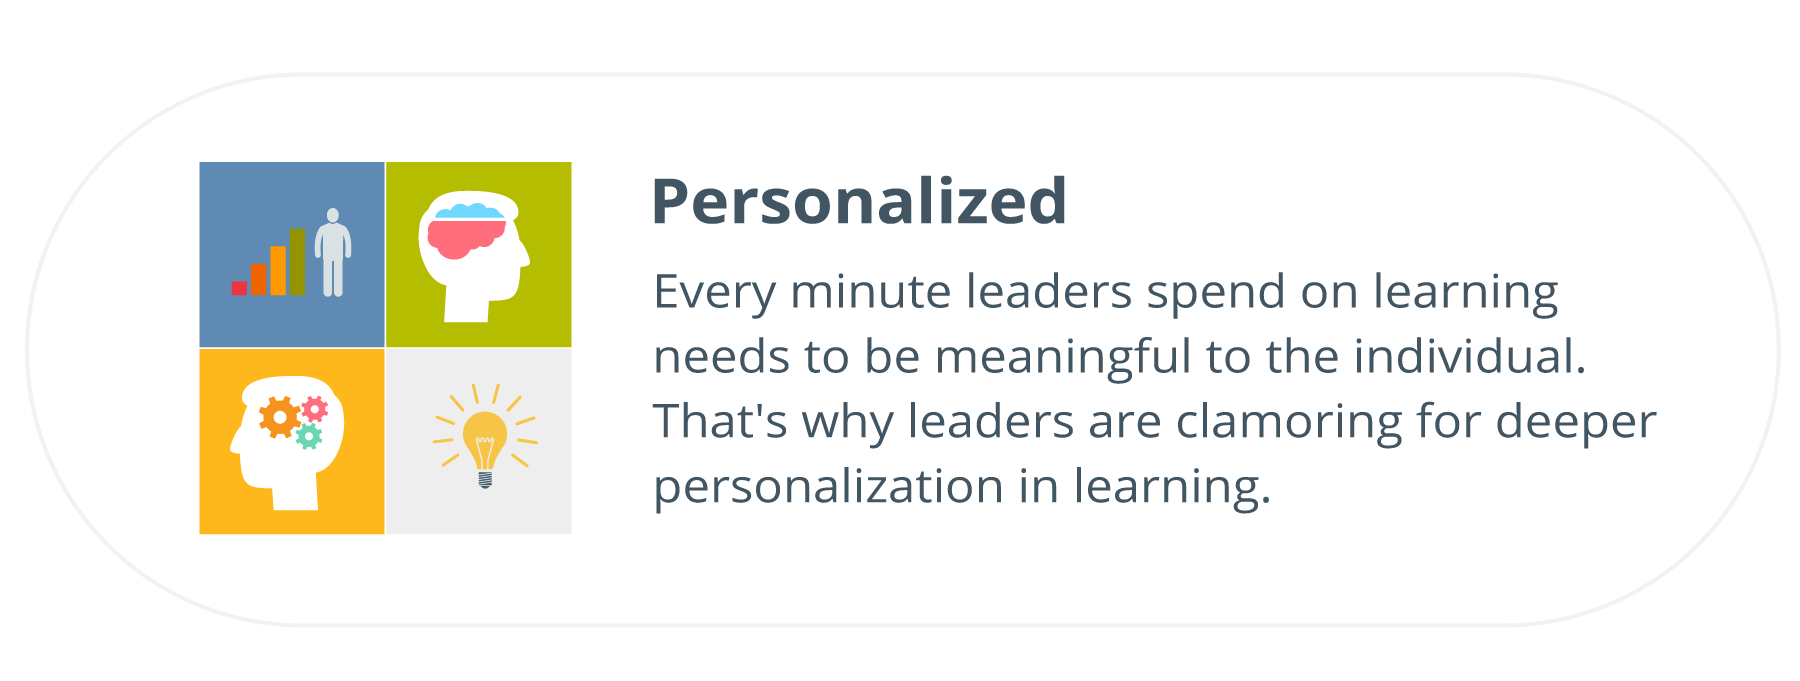 a grid with four images that represent personalized learning, a light bulb, an outline of a head with gears, etc., written to the right of it: Personalized: Every minute leaders spend on learning needs to be meaningful to the individual. That’s why leaders are clamoring for deeper personalization in learning. 